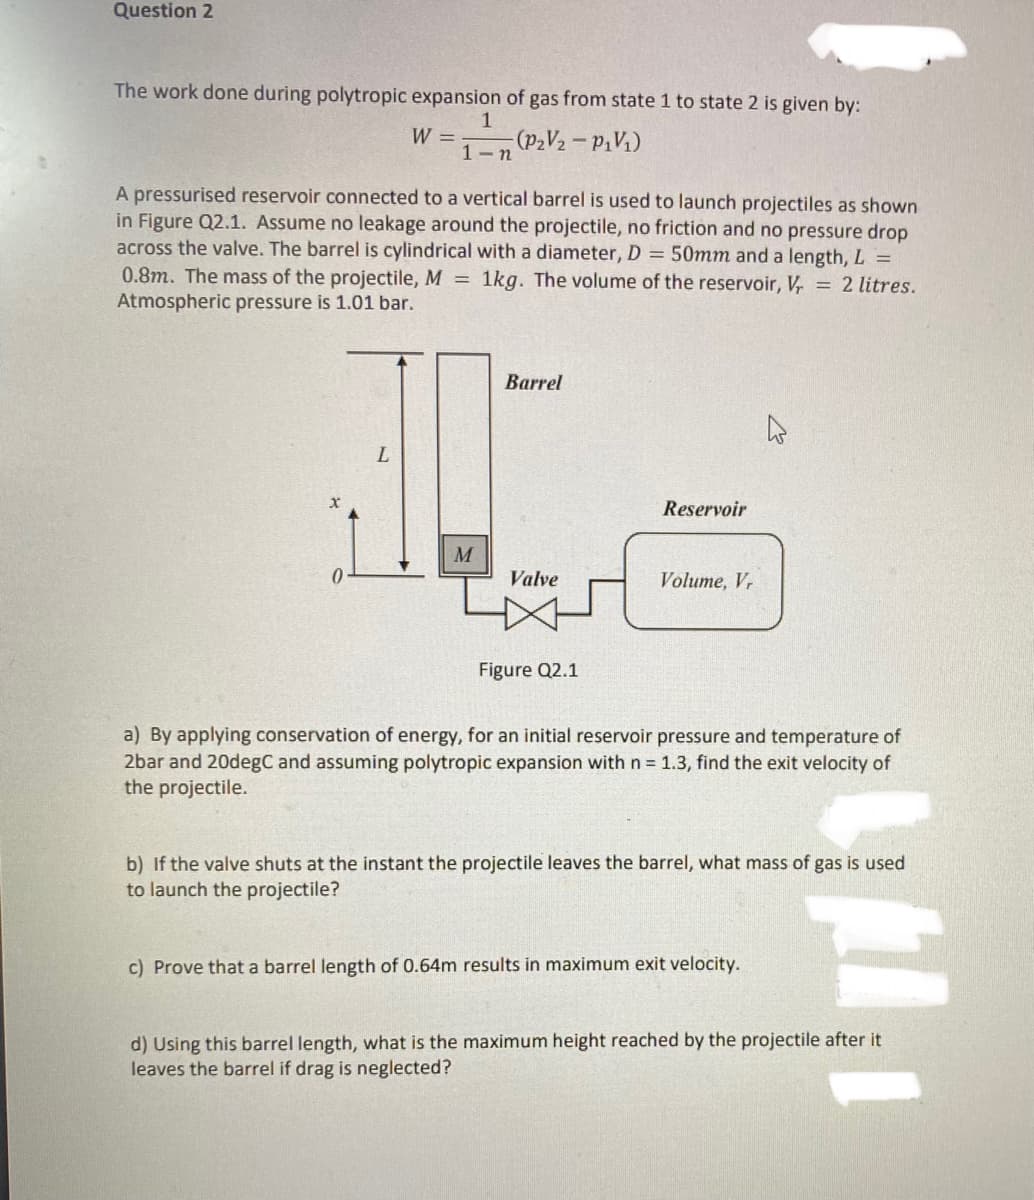 Question 2
The work done during polytropic expansion of gas from state 1 to state 2 is given by:
W =
(P₂V₂ - P₁V₁)
1-n
A pressurised reservoir connected to a vertical barrel is used to launch projectiles as shown
in Figure Q2.1. Assume no leakage around the projectile, no friction and no pressure drop
across the valve. The barrel is cylindrical with a diameter, D = 50mm and a length, L =
0.8m. The mass of the projectile, M = 1kg. The volume of the reservoir, V = 2 litres.
Atmospheric pressure is 1.01 bar.
0
L
M
Barrel
Valve
Figure Q2.1
Reservoir
Volume, Vr
a) By applying conservation of energy, for an initial reservoir pressure and temperature of
2bar and 20degC and assuming polytropic expansion with n = 1.3, find the exit velocity of
the projectile.
b) If the valve shuts at the instant the projectile leaves the barrel, what mass of gas is used
to launch the projectile?
c) Prove that a barrel length of 0.64m results in maximum exit velocity.
d) Using this barrel length, what is the maximum height reached by the projectile after it
leaves the barrel if drag is neglected?